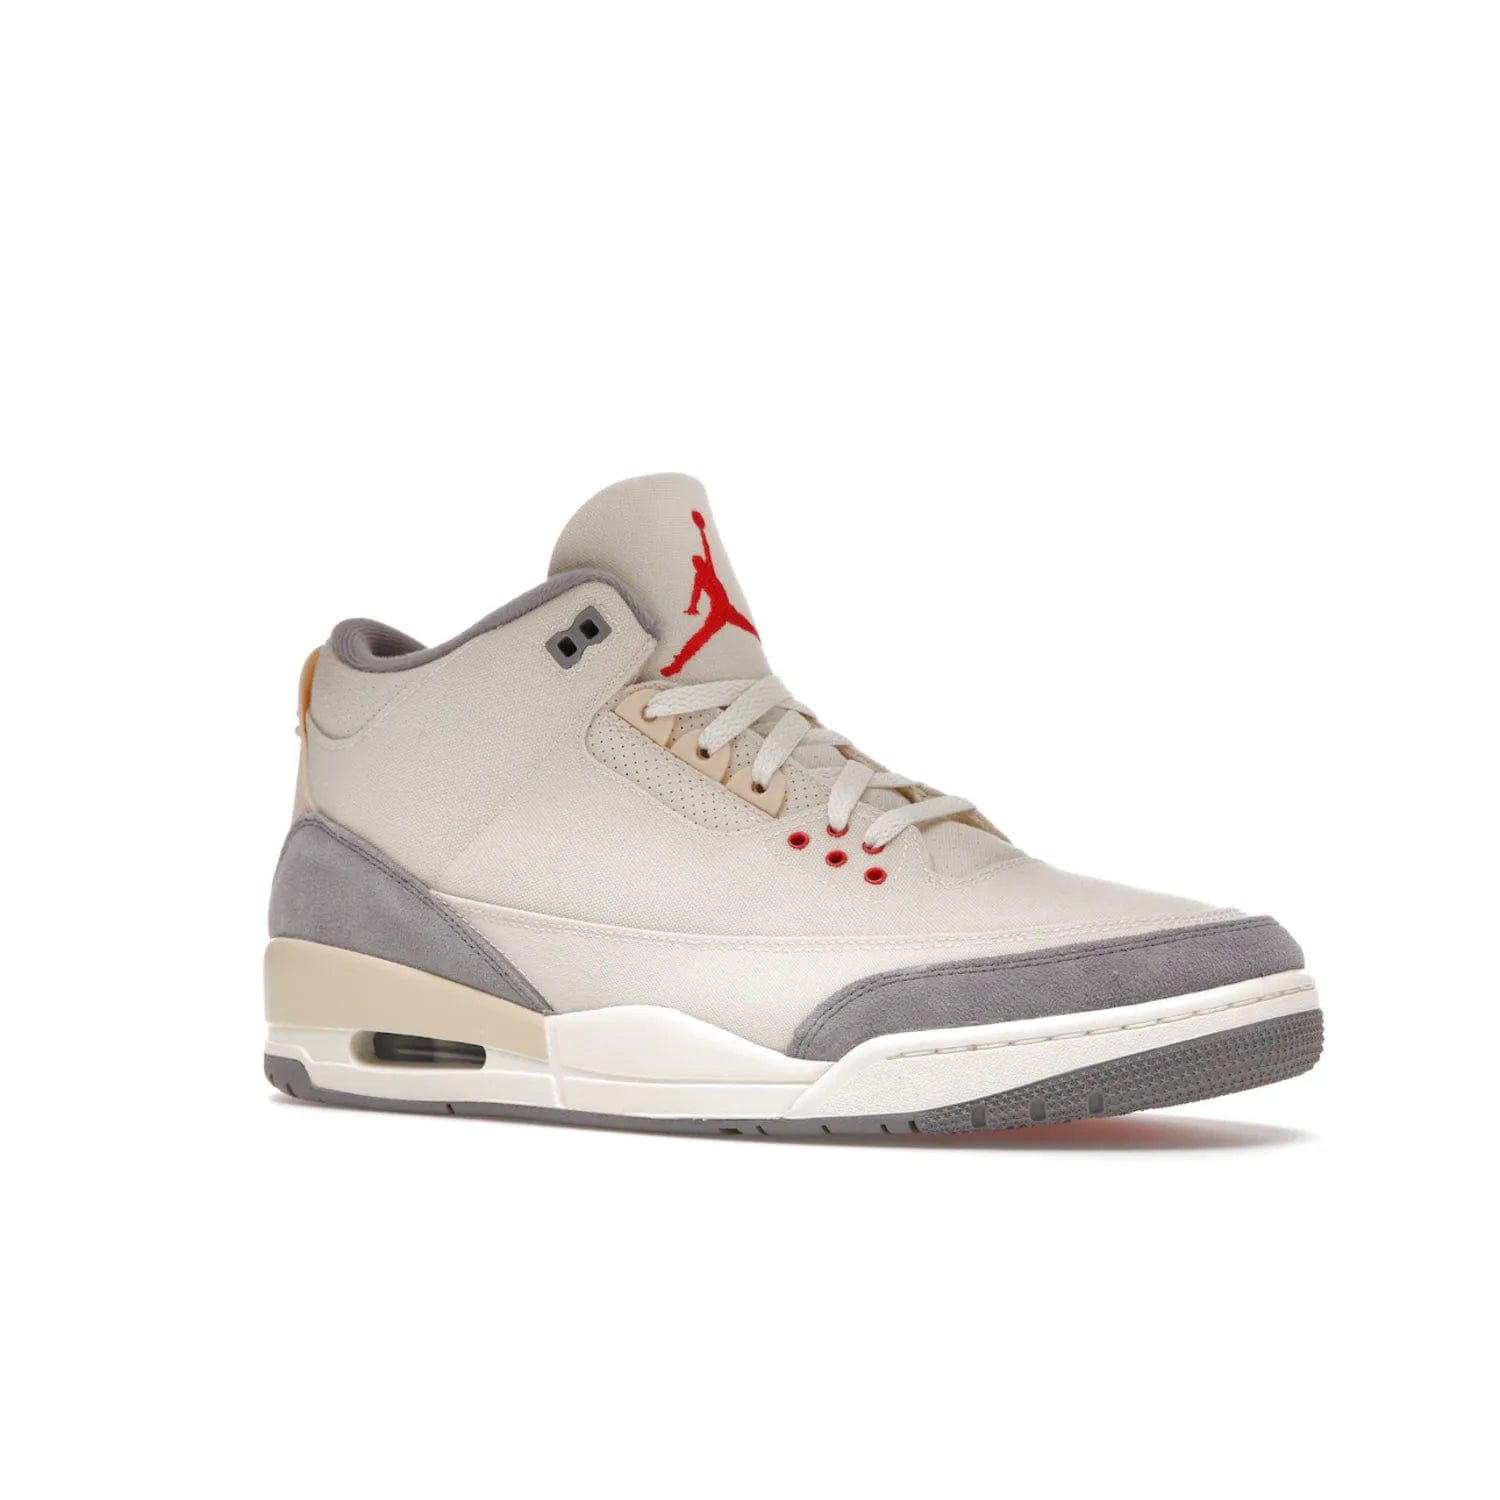 Jordan 3 Retro Muslin - Image 4 - Only at www.BallersClubKickz.com - Eye-catching Air Jordan 3 Retro Muslin in a neutral palette of grey, cream, and red. Featuring canvas upper, suede overlays and white/grey Air Max sole. Available in March 2022.